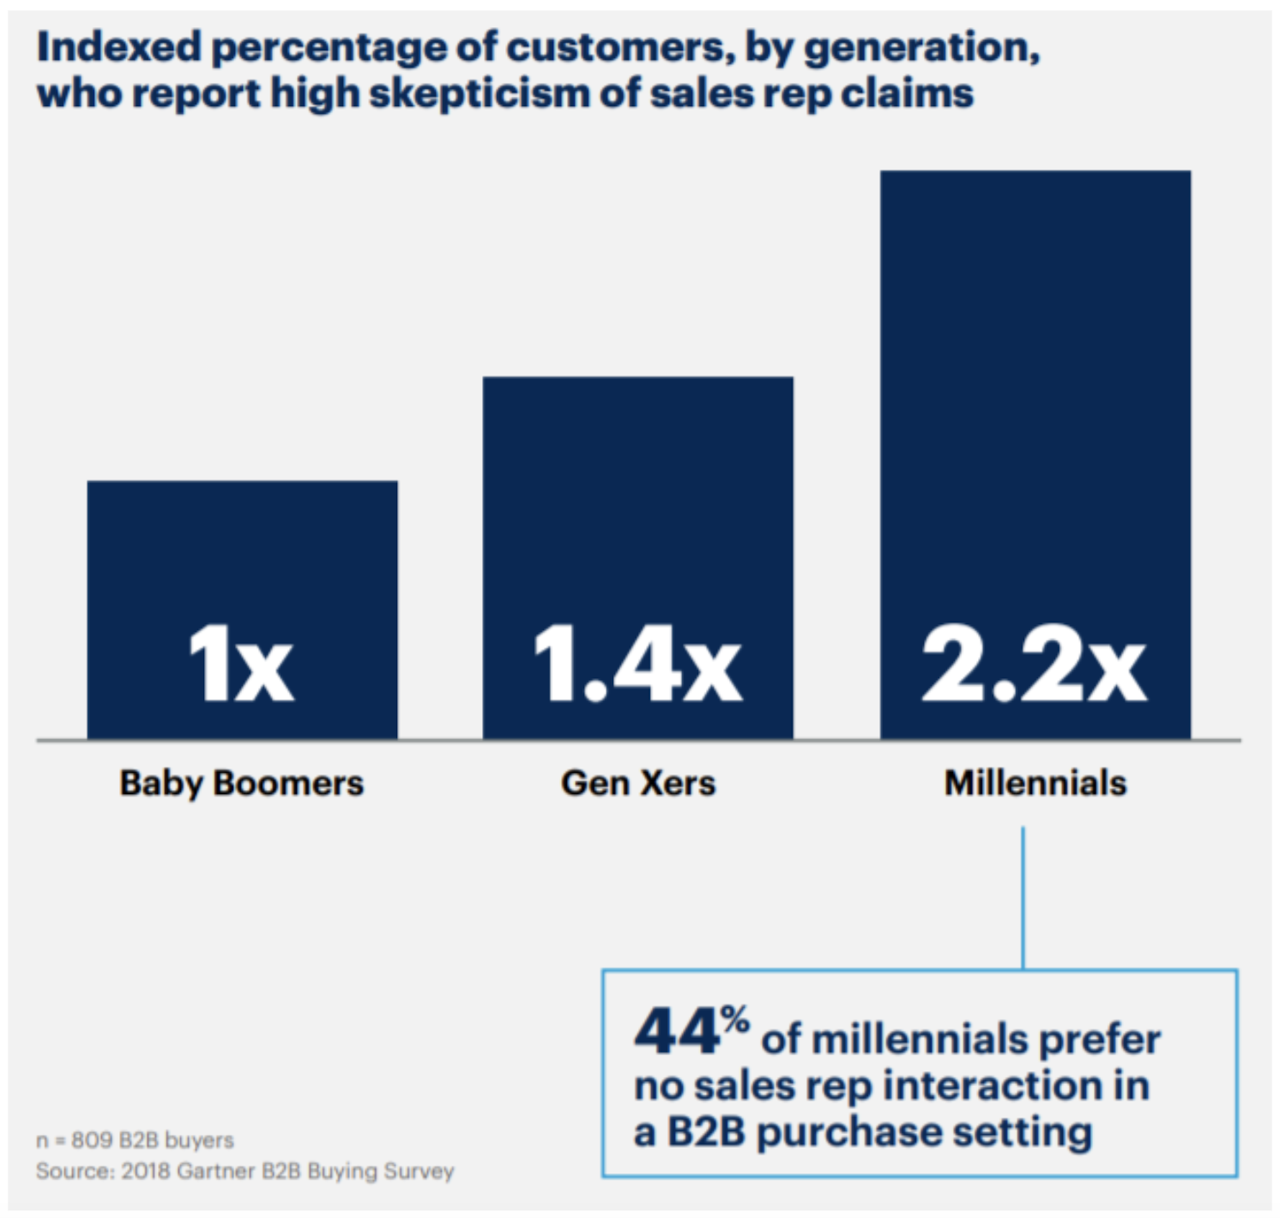 44% of millennials prefer no sales rep interaction in a B2B purchase setting